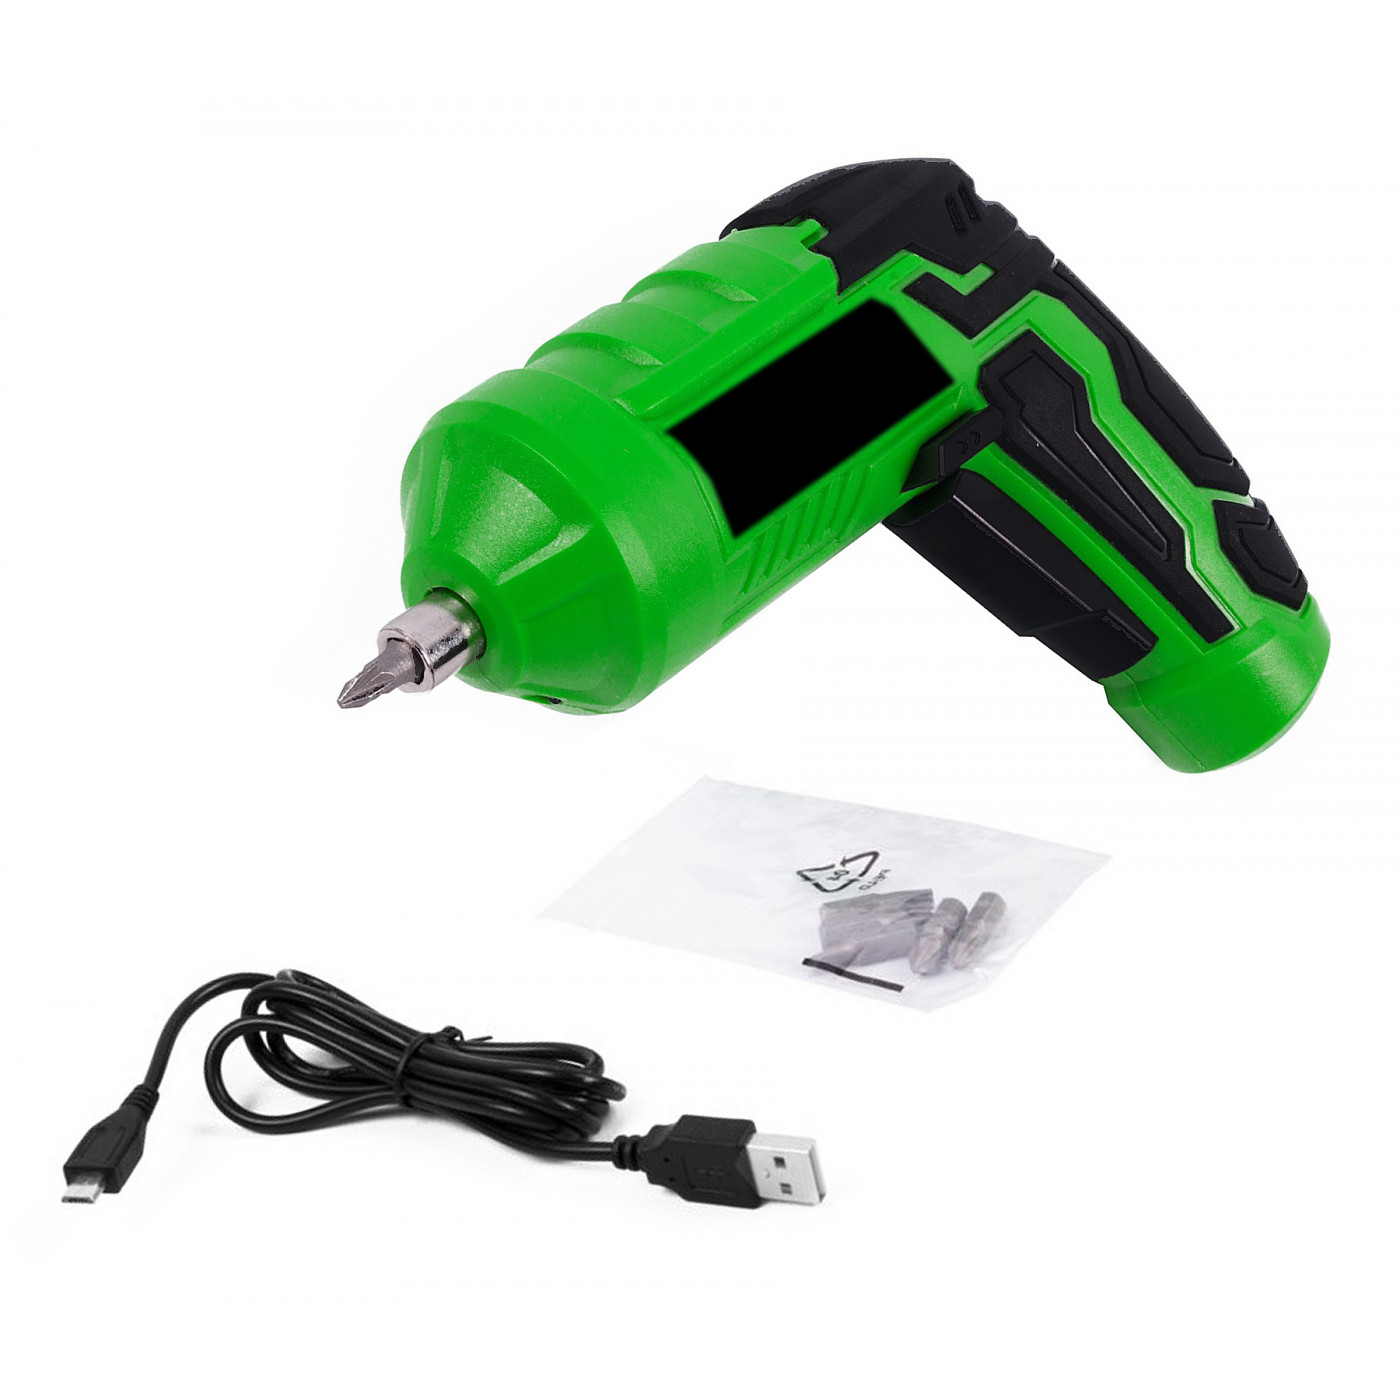 Small electric screw and drill on USB